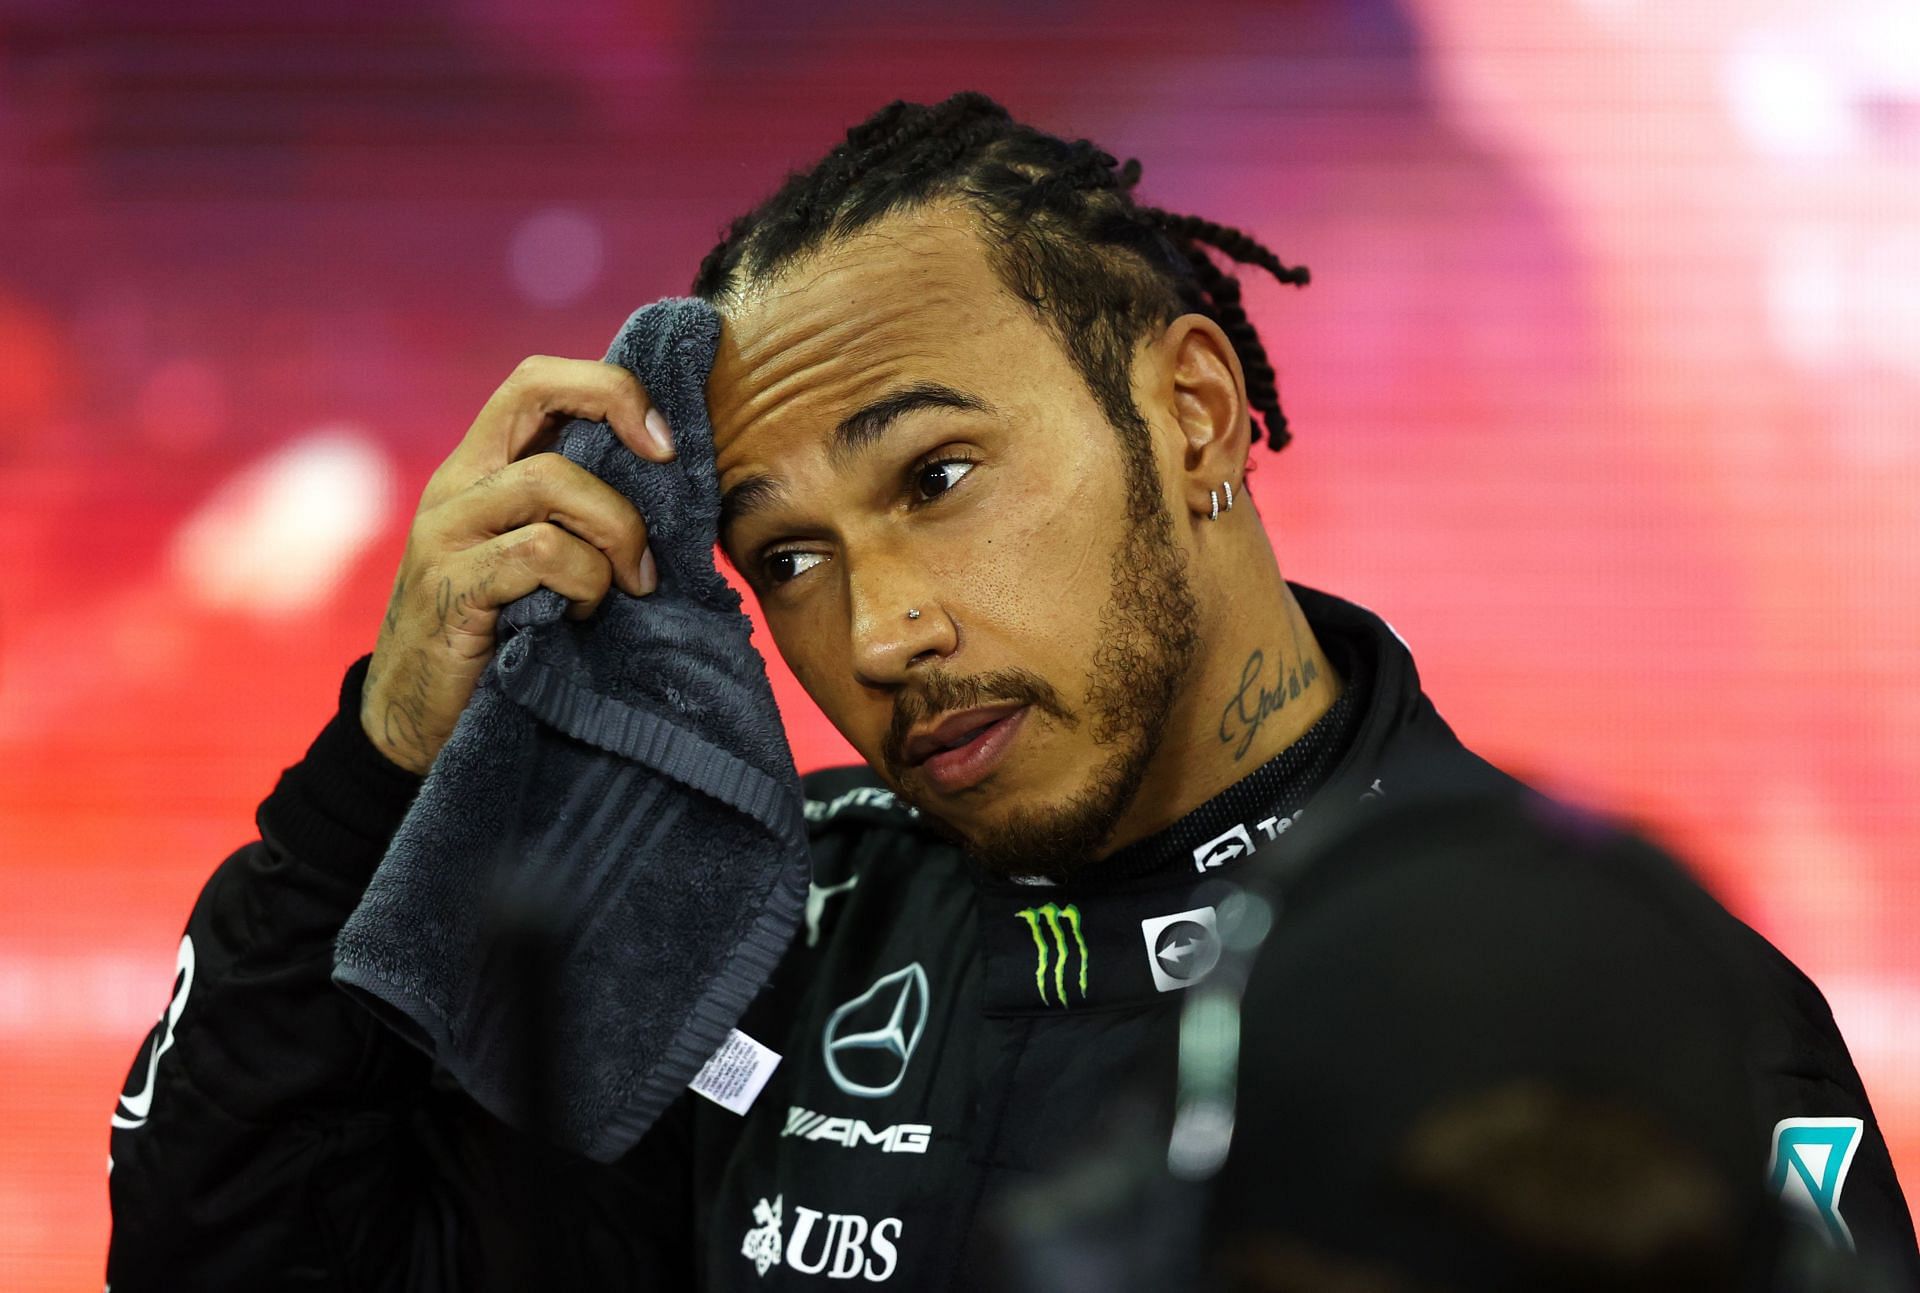 Lewis Hamilton looks dejected in parc ferm&eacute; after the 2021 Abu Dhabi Grand Prix (Photo by Bryn Lennon/Getty Images)